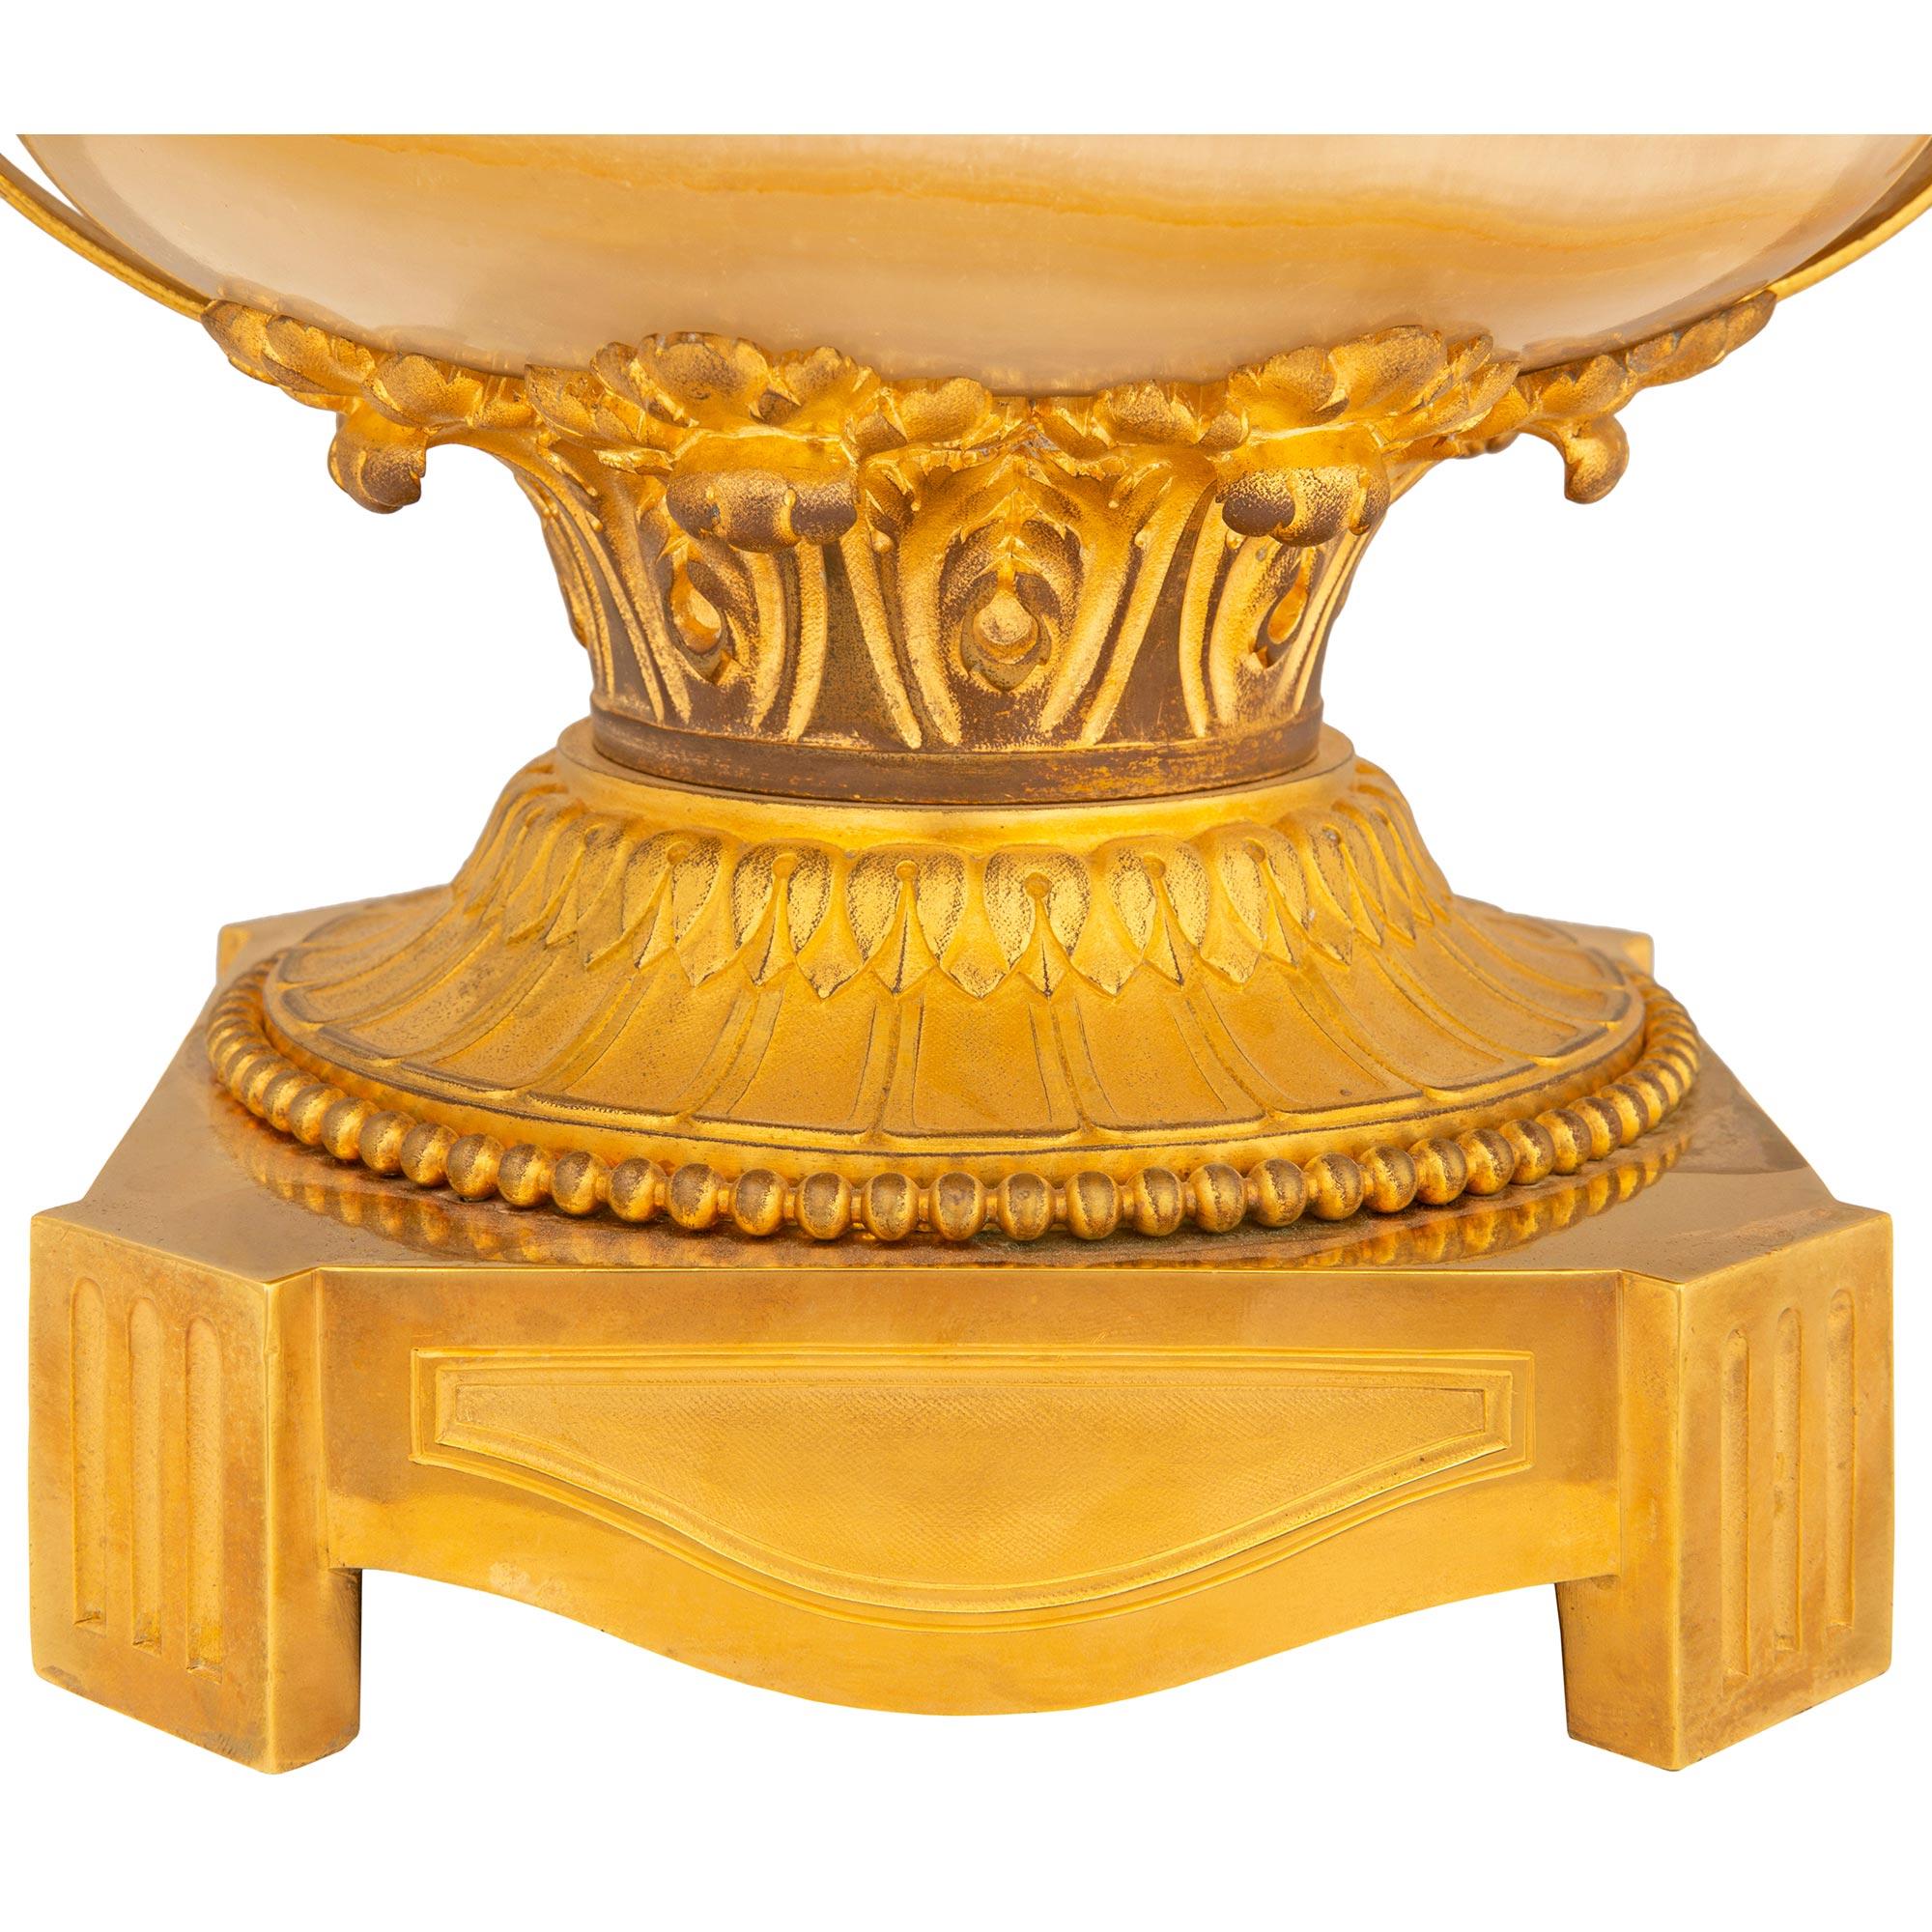 French 19th Century Louis XVI St. Belle Époque Period Onyx and Ormolu Urn For Sale 6